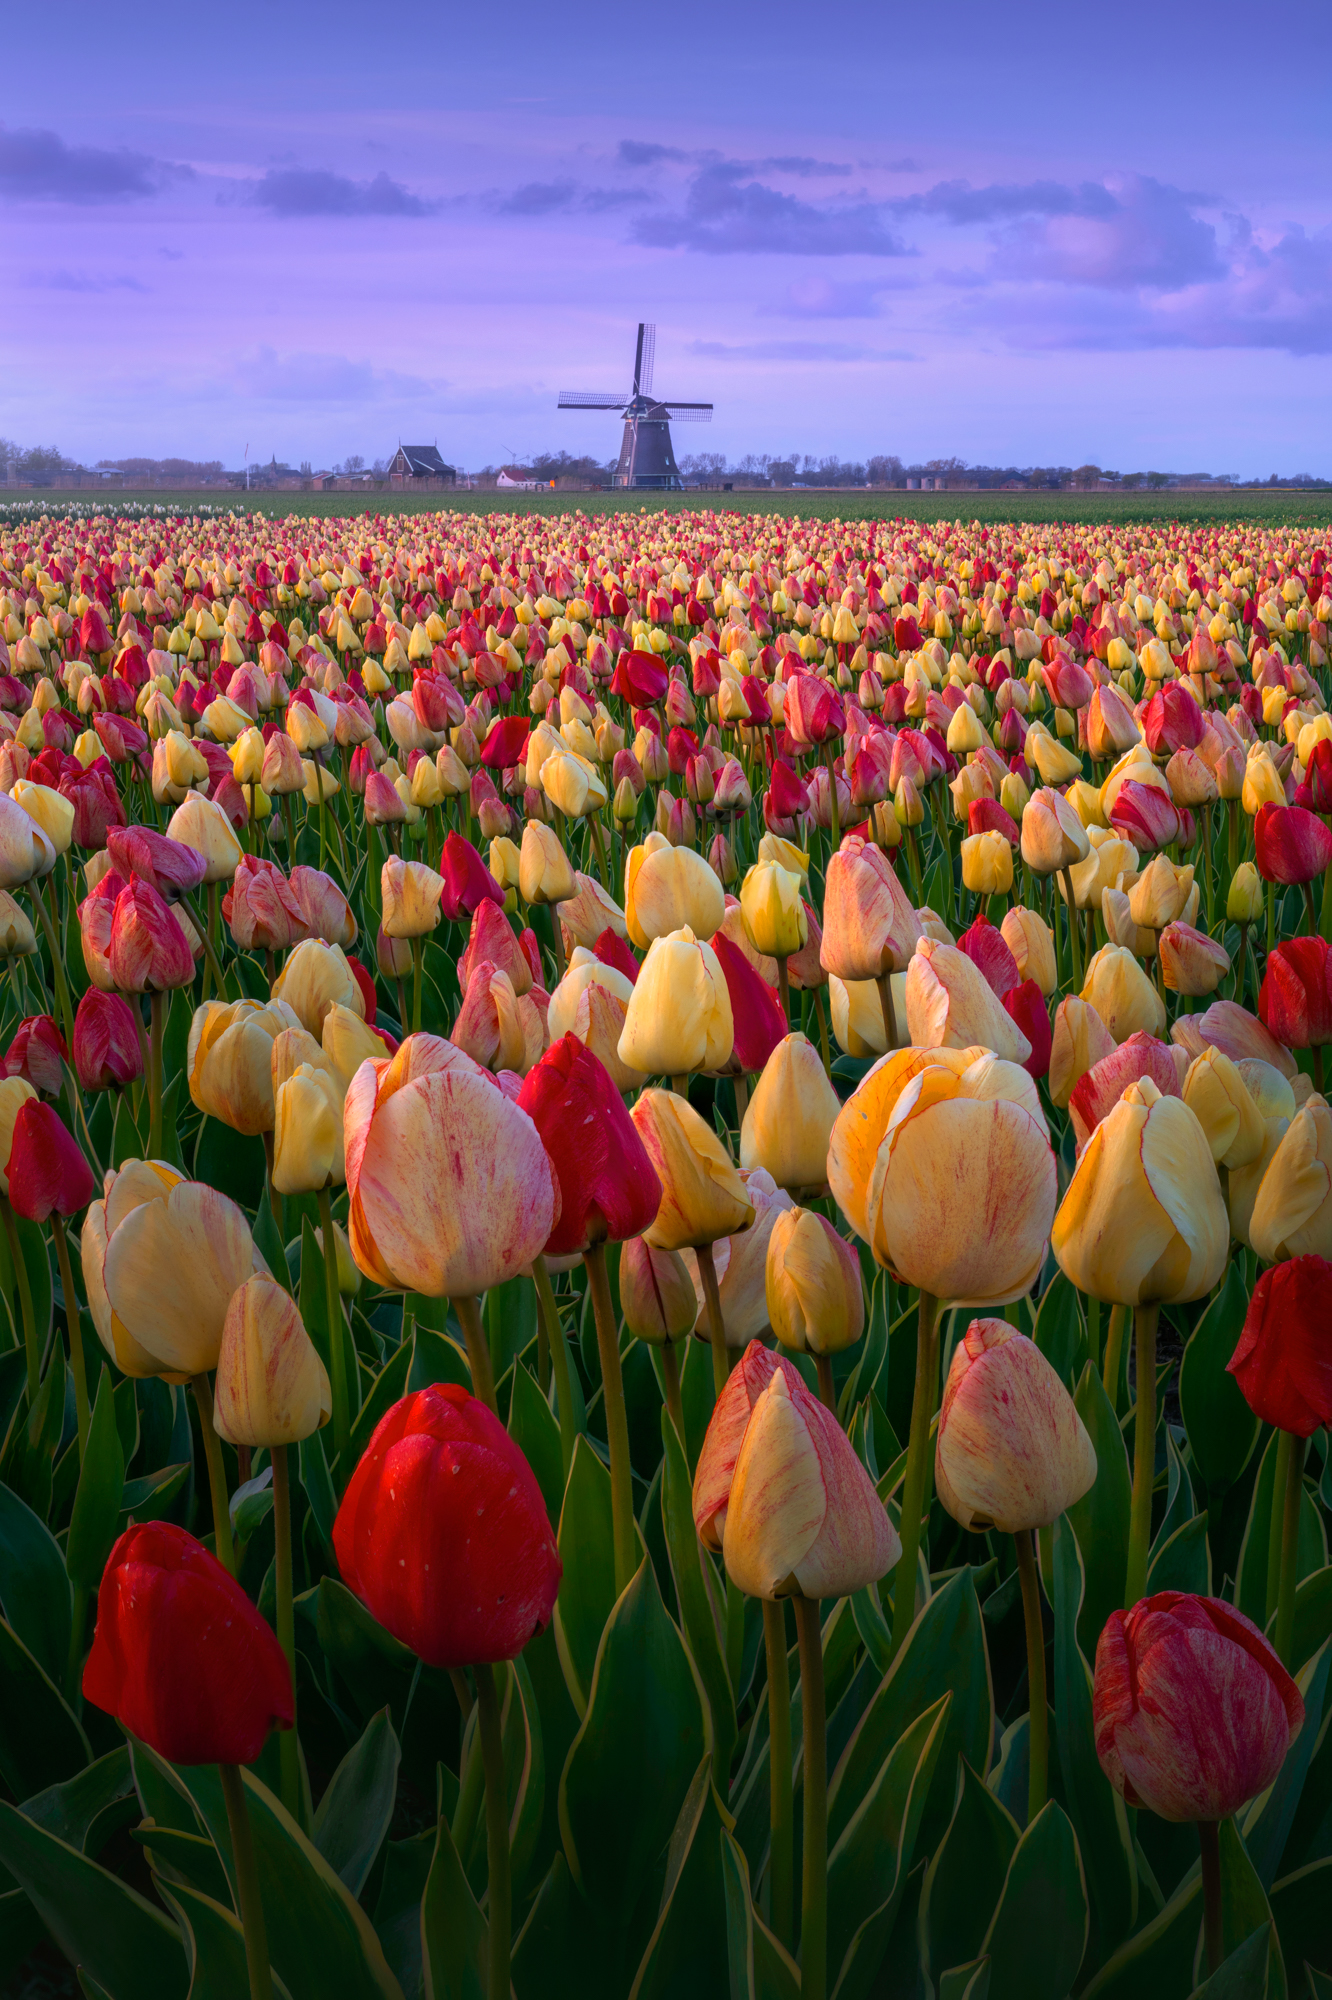 Classic view of a windmill with tulips in front. The red and yellow are a mixed version of tulips.